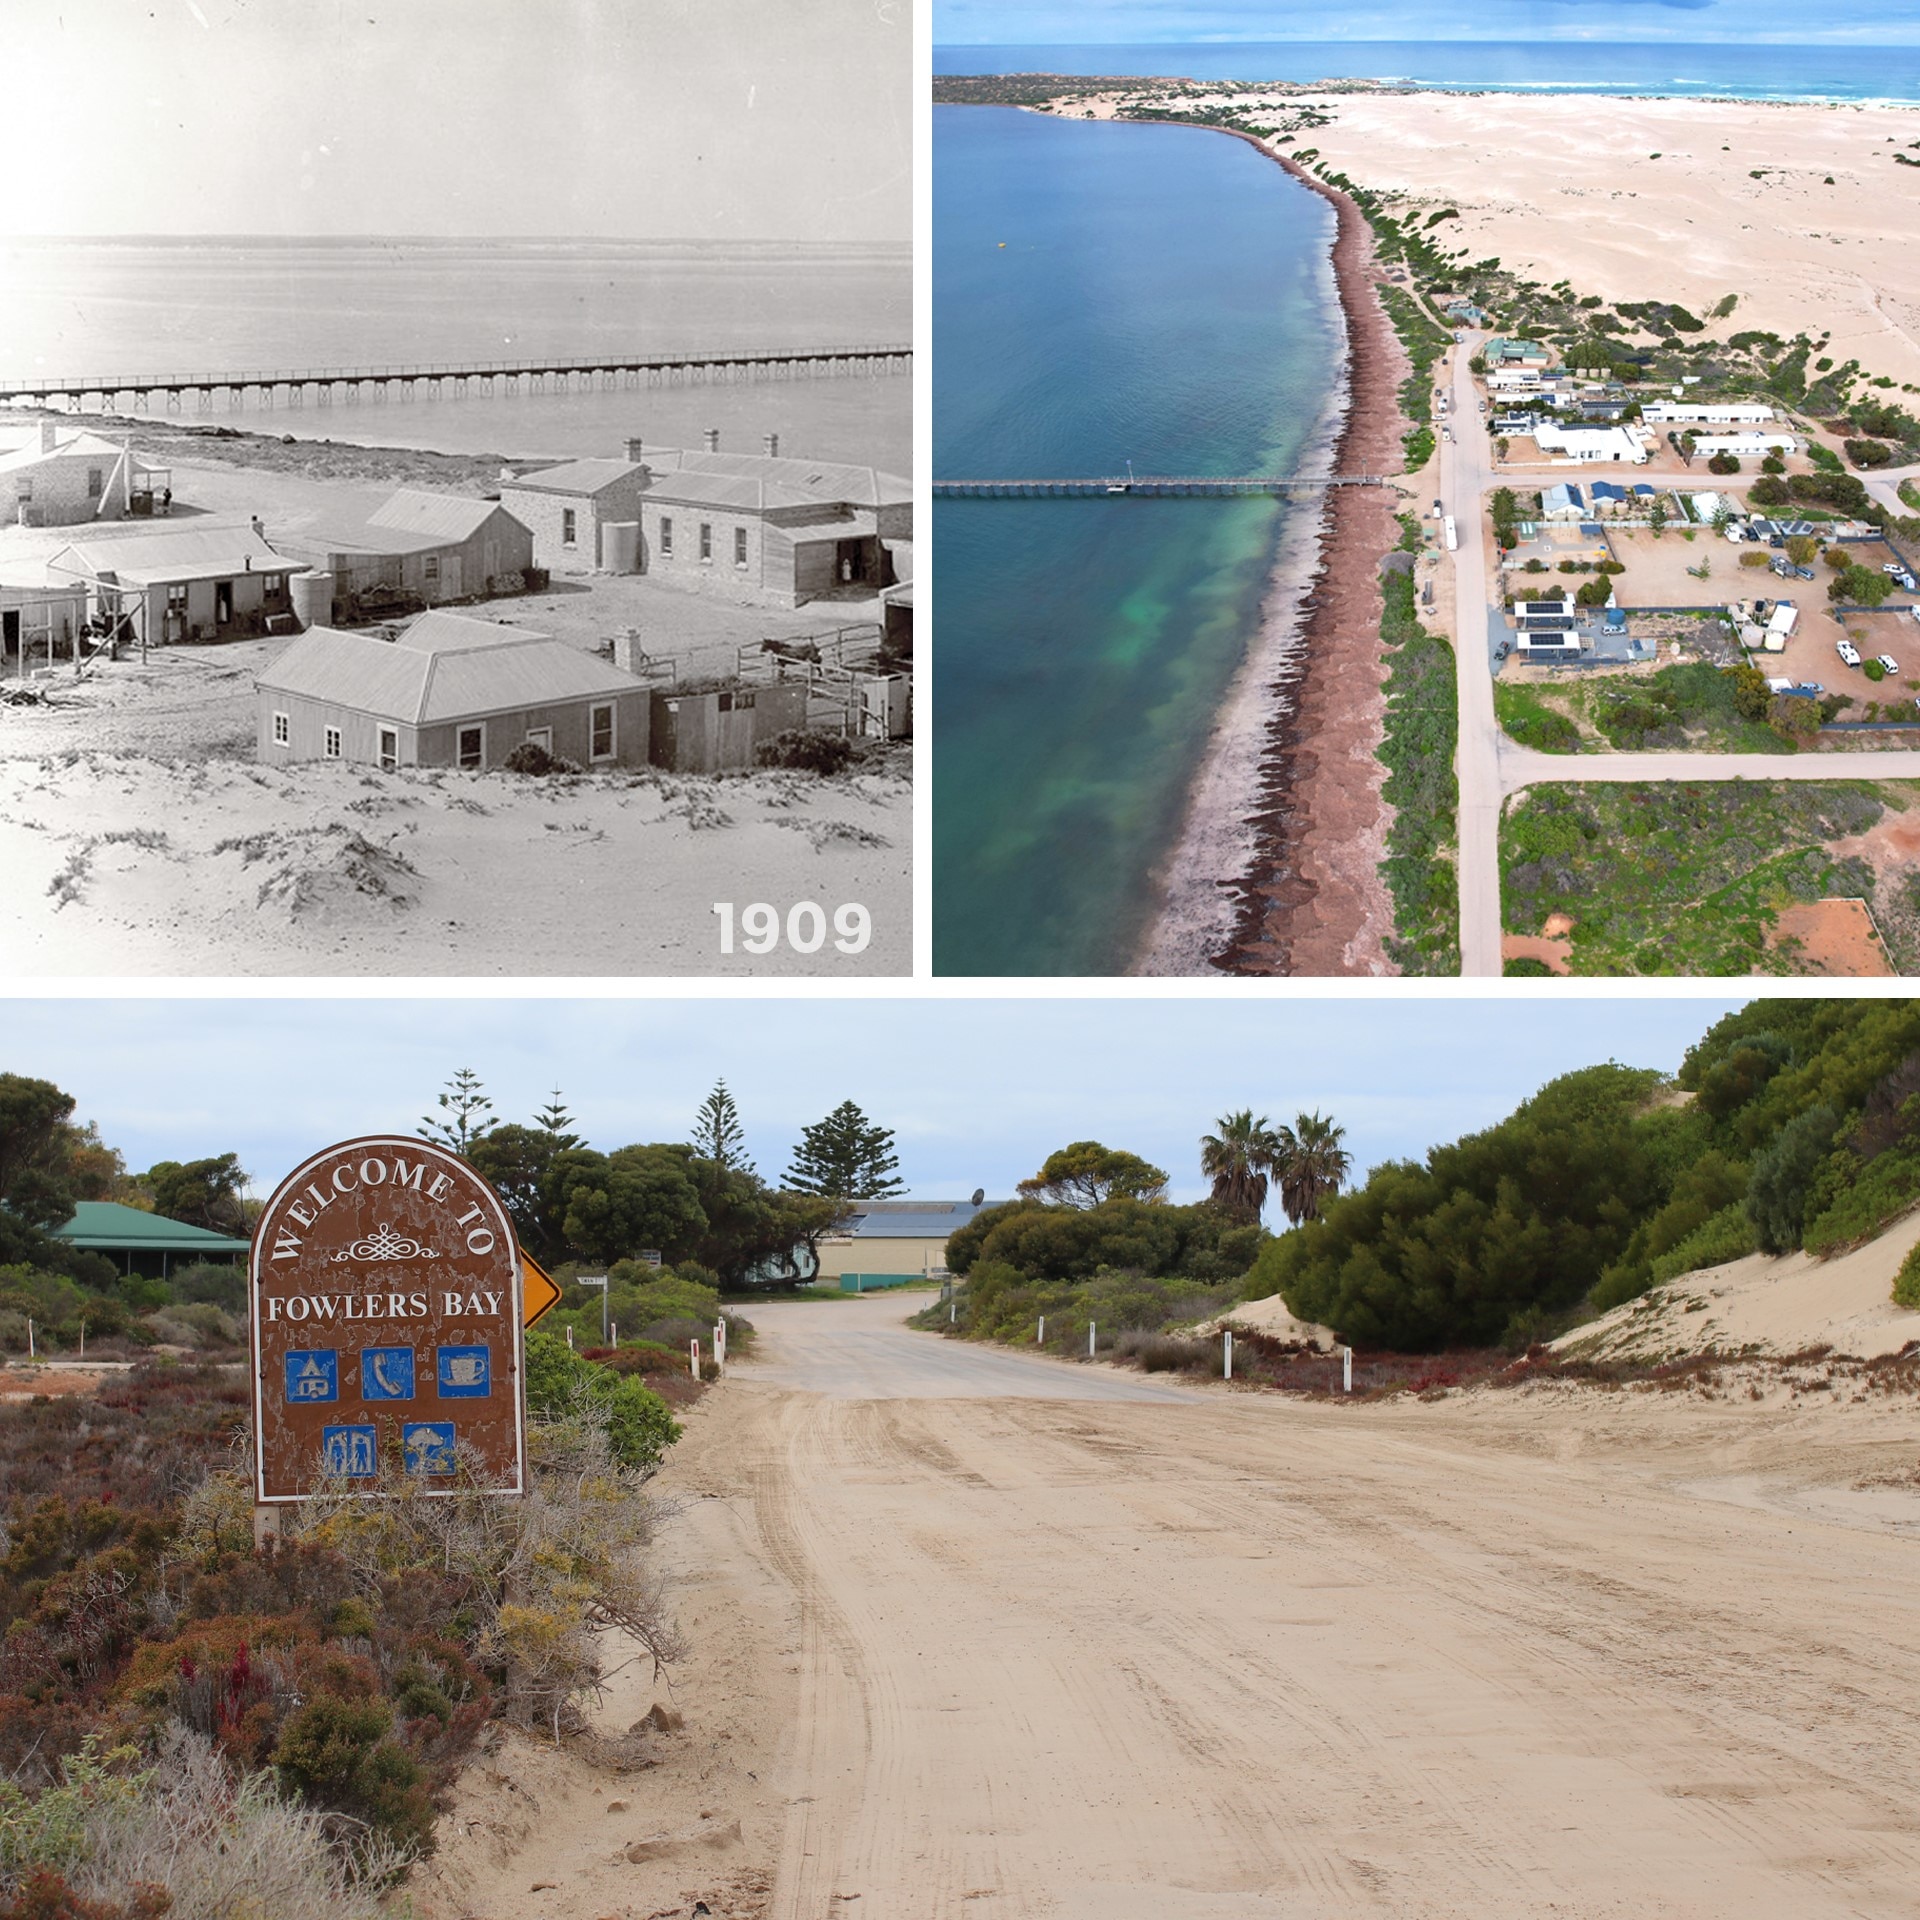 Three photos, one of old town, aerial of town and jetty, and road sign on gravel road